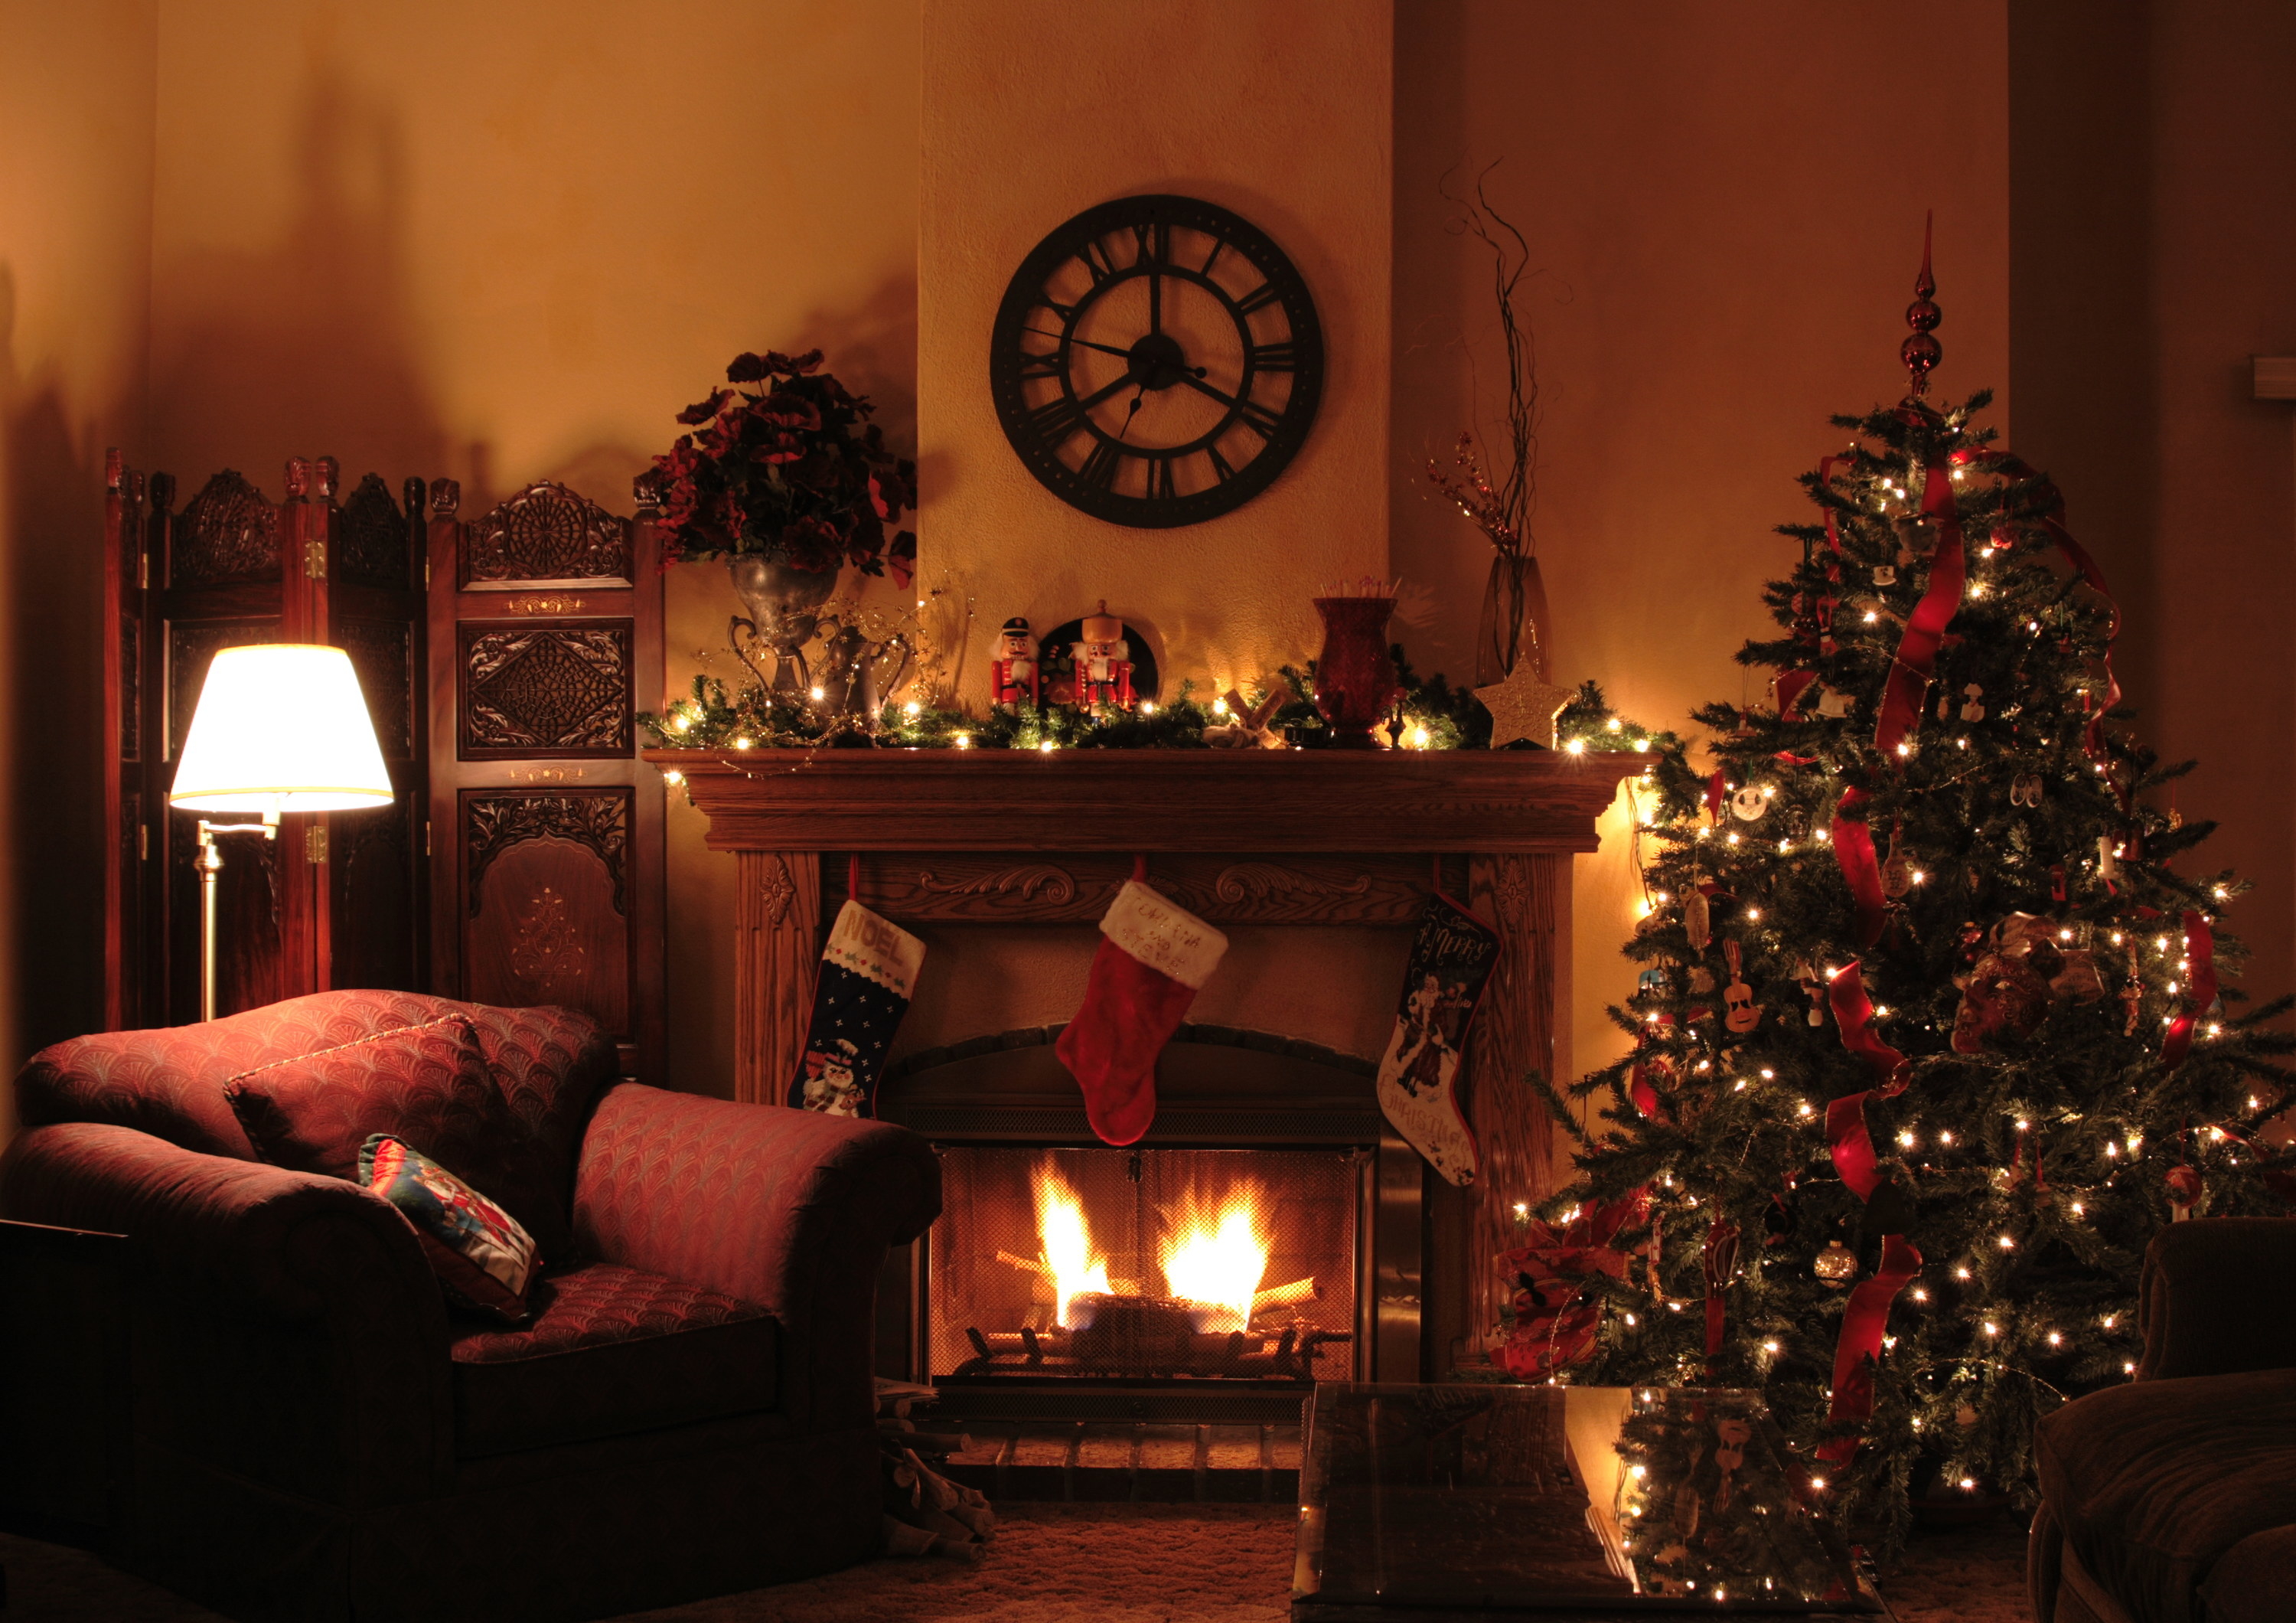 living room decorated for christmas with a clock over the mantle